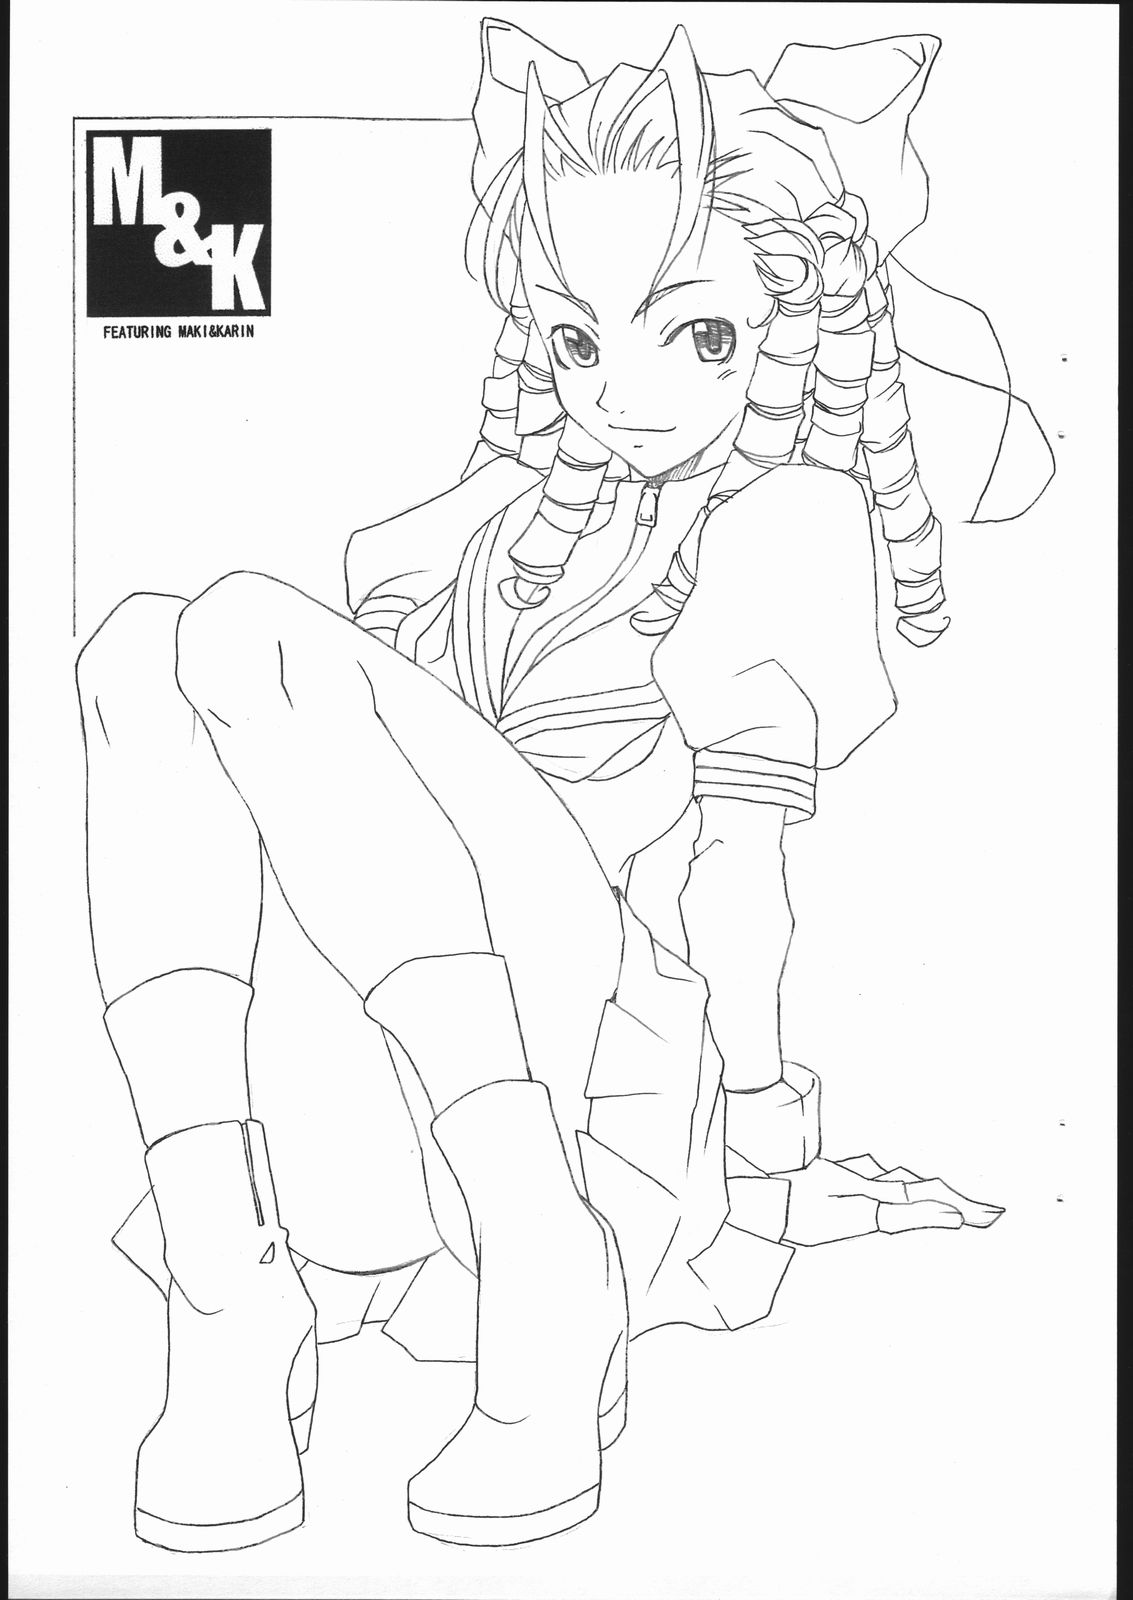 (C62) [Mushimusume Aikoukai (ASTROGUYII)] M&K Ver.2 (Street Fighter, King of Fighters) page 3 full